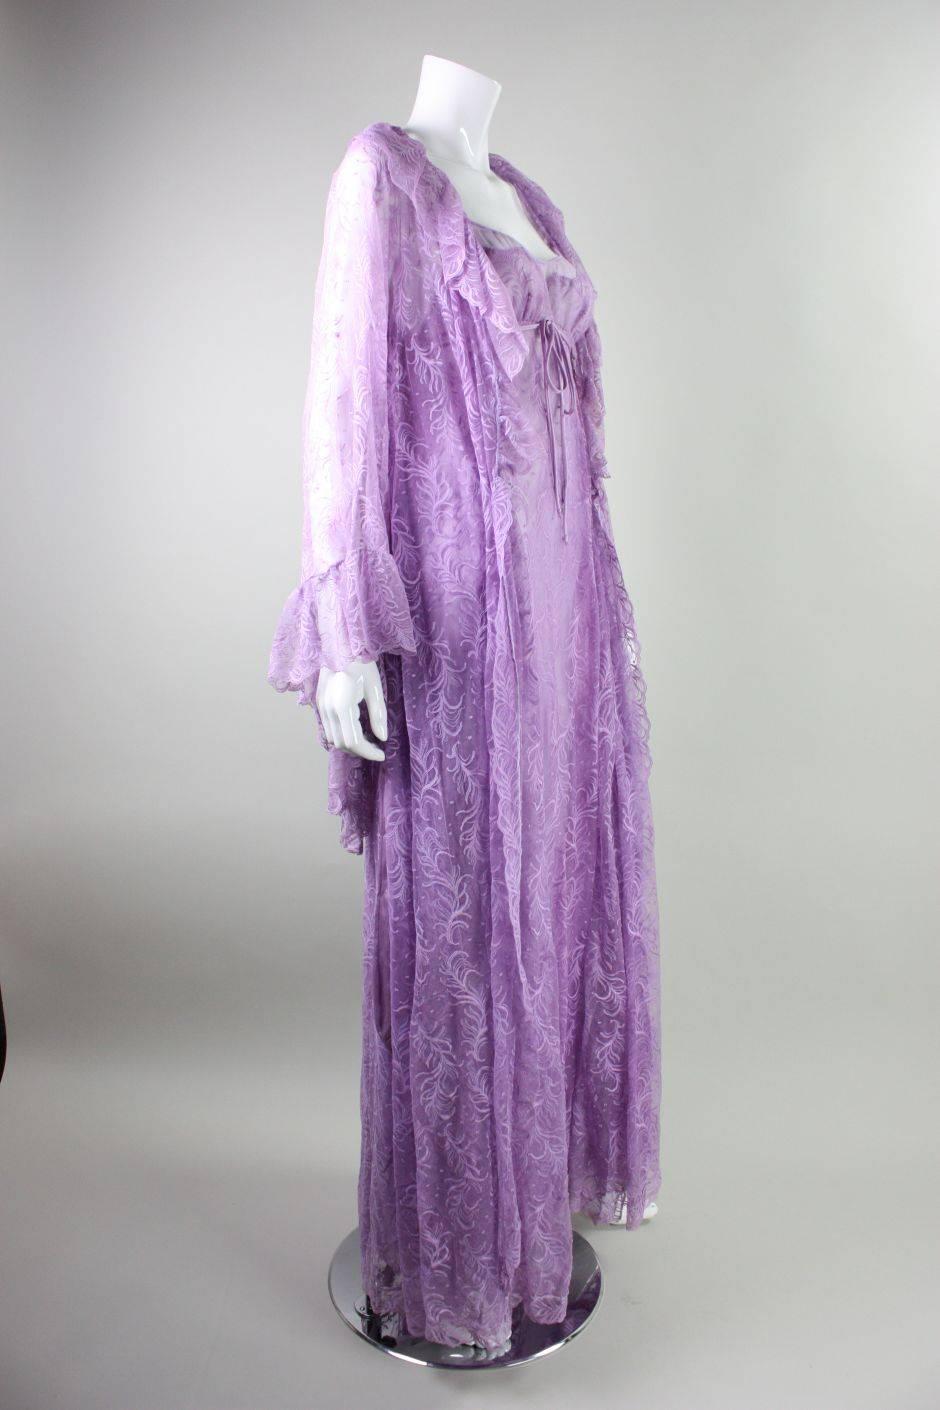 1980's Bob Mackie for Glydons Lilac Lace Peignoir Set In Excellent Condition For Sale In Los Angeles, CA